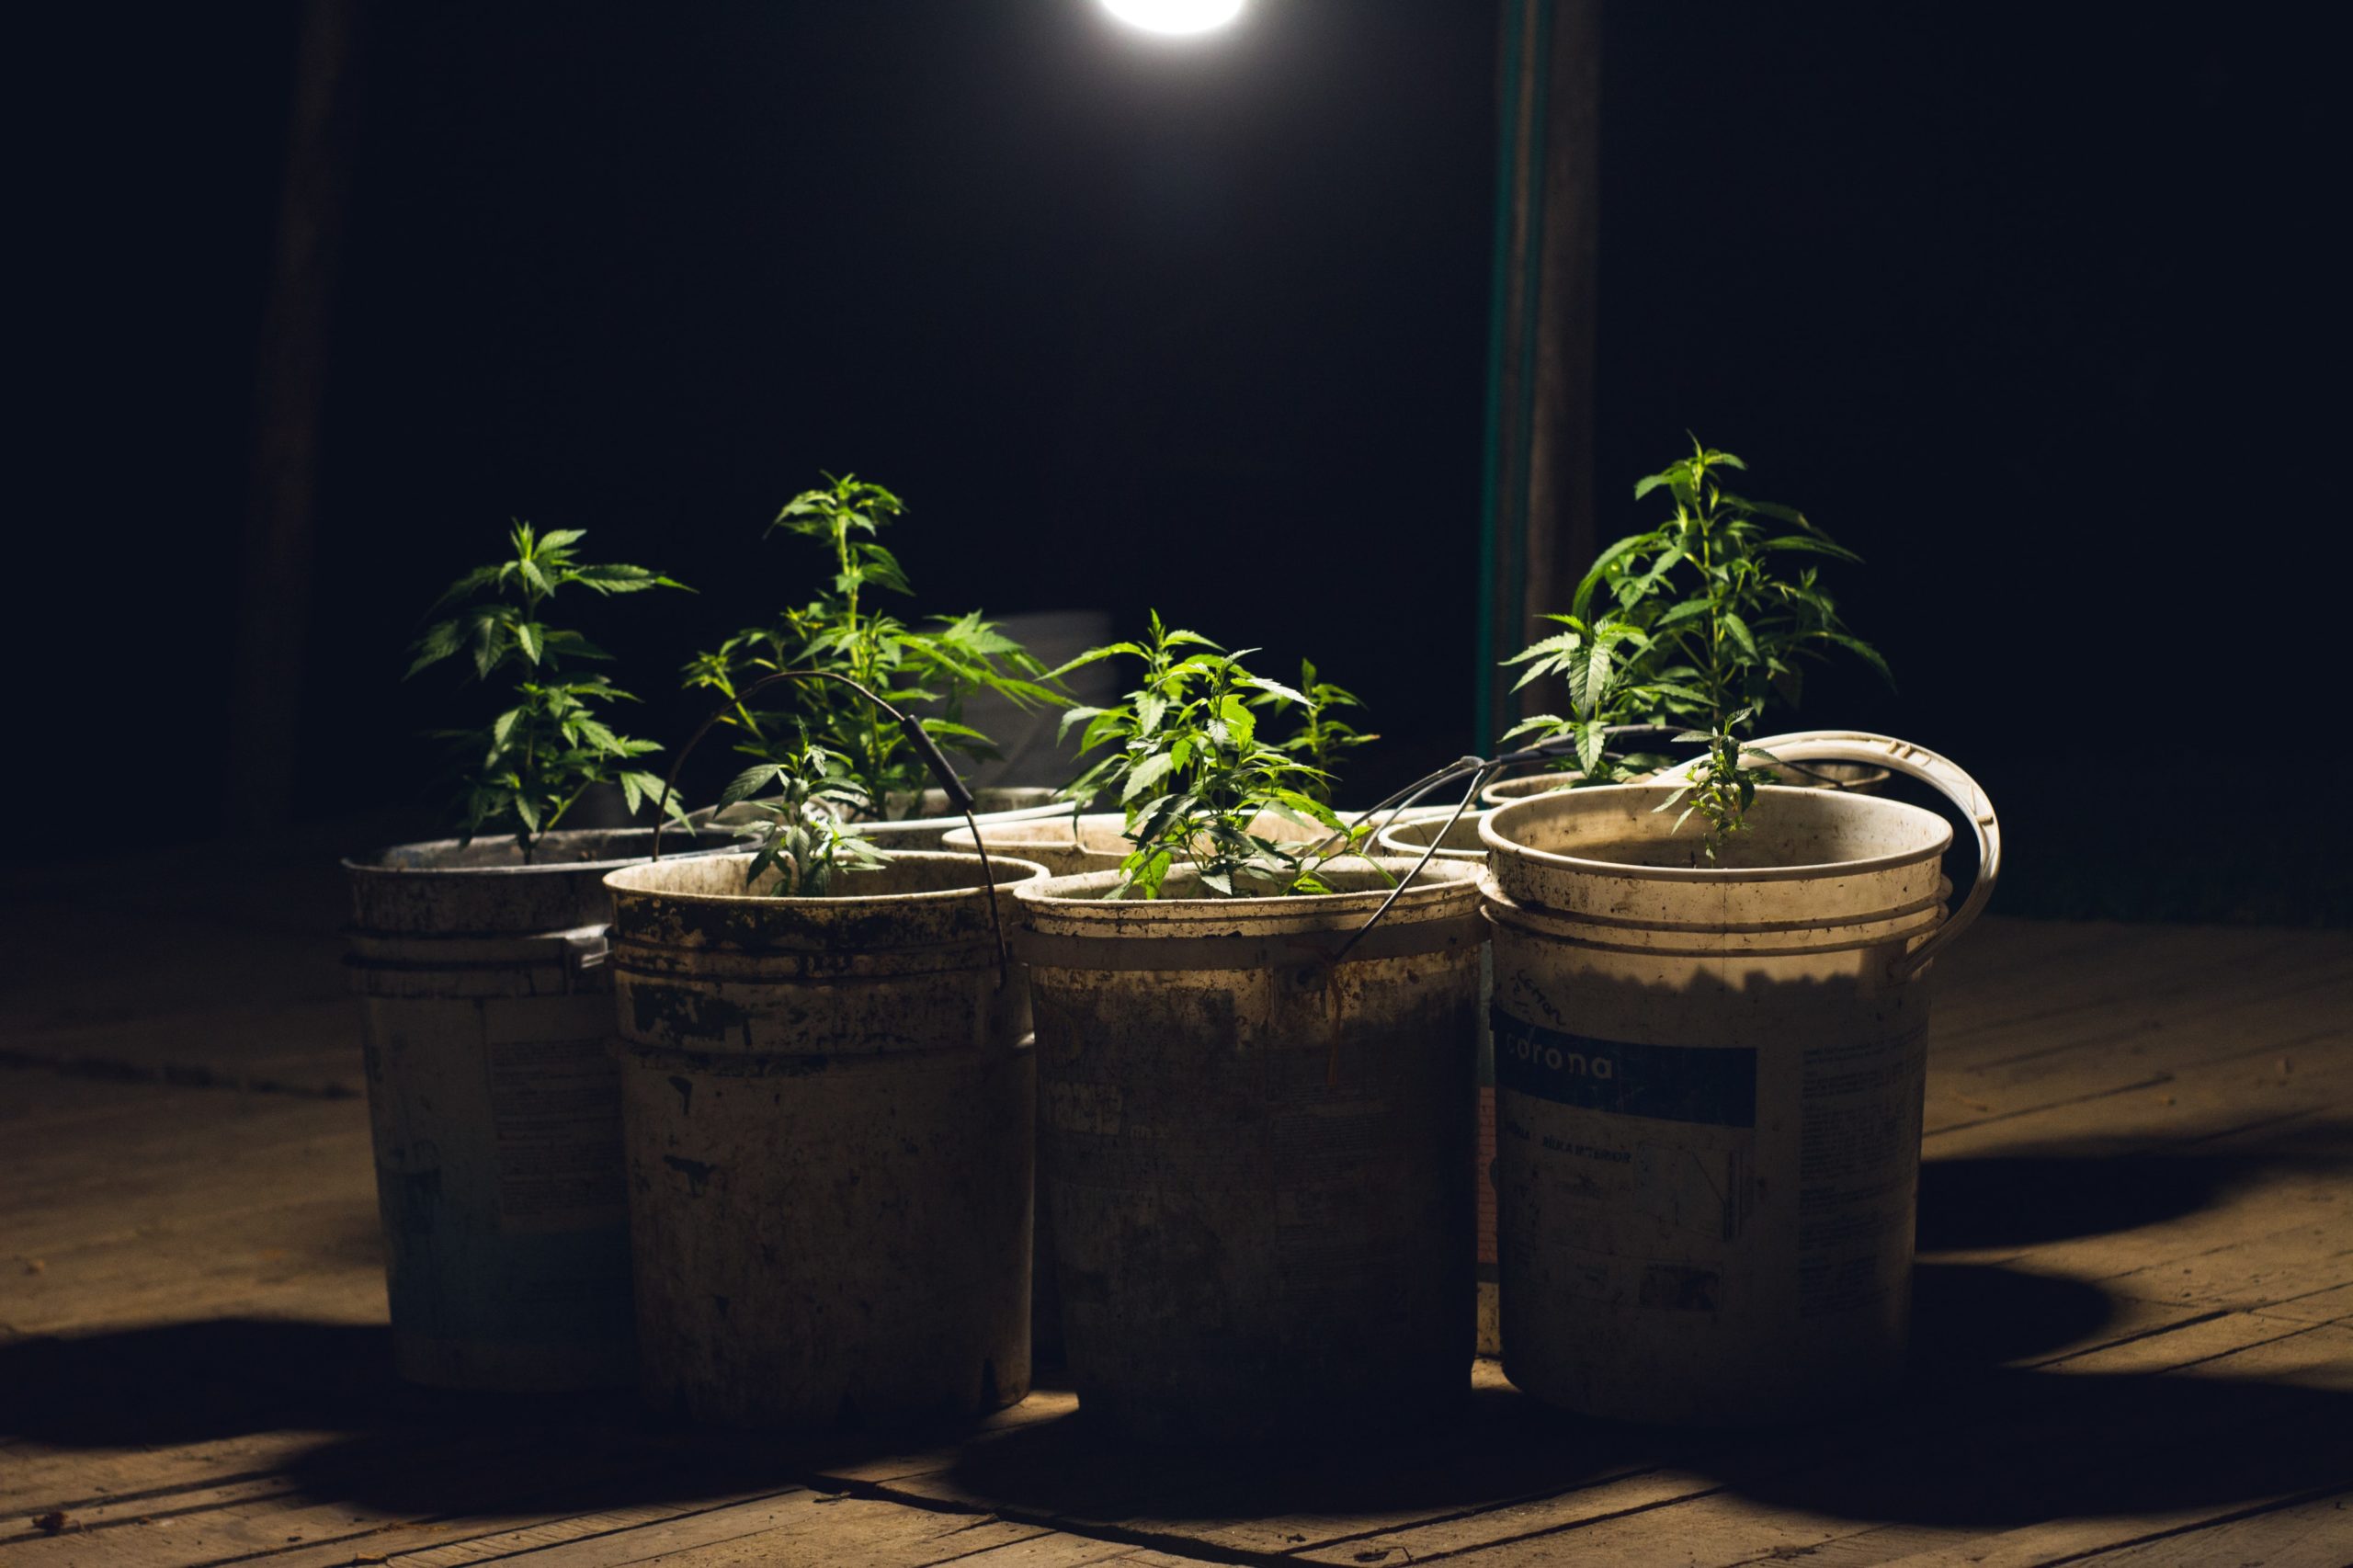 What Budget Do You Need for Growing Marijuana at Home?